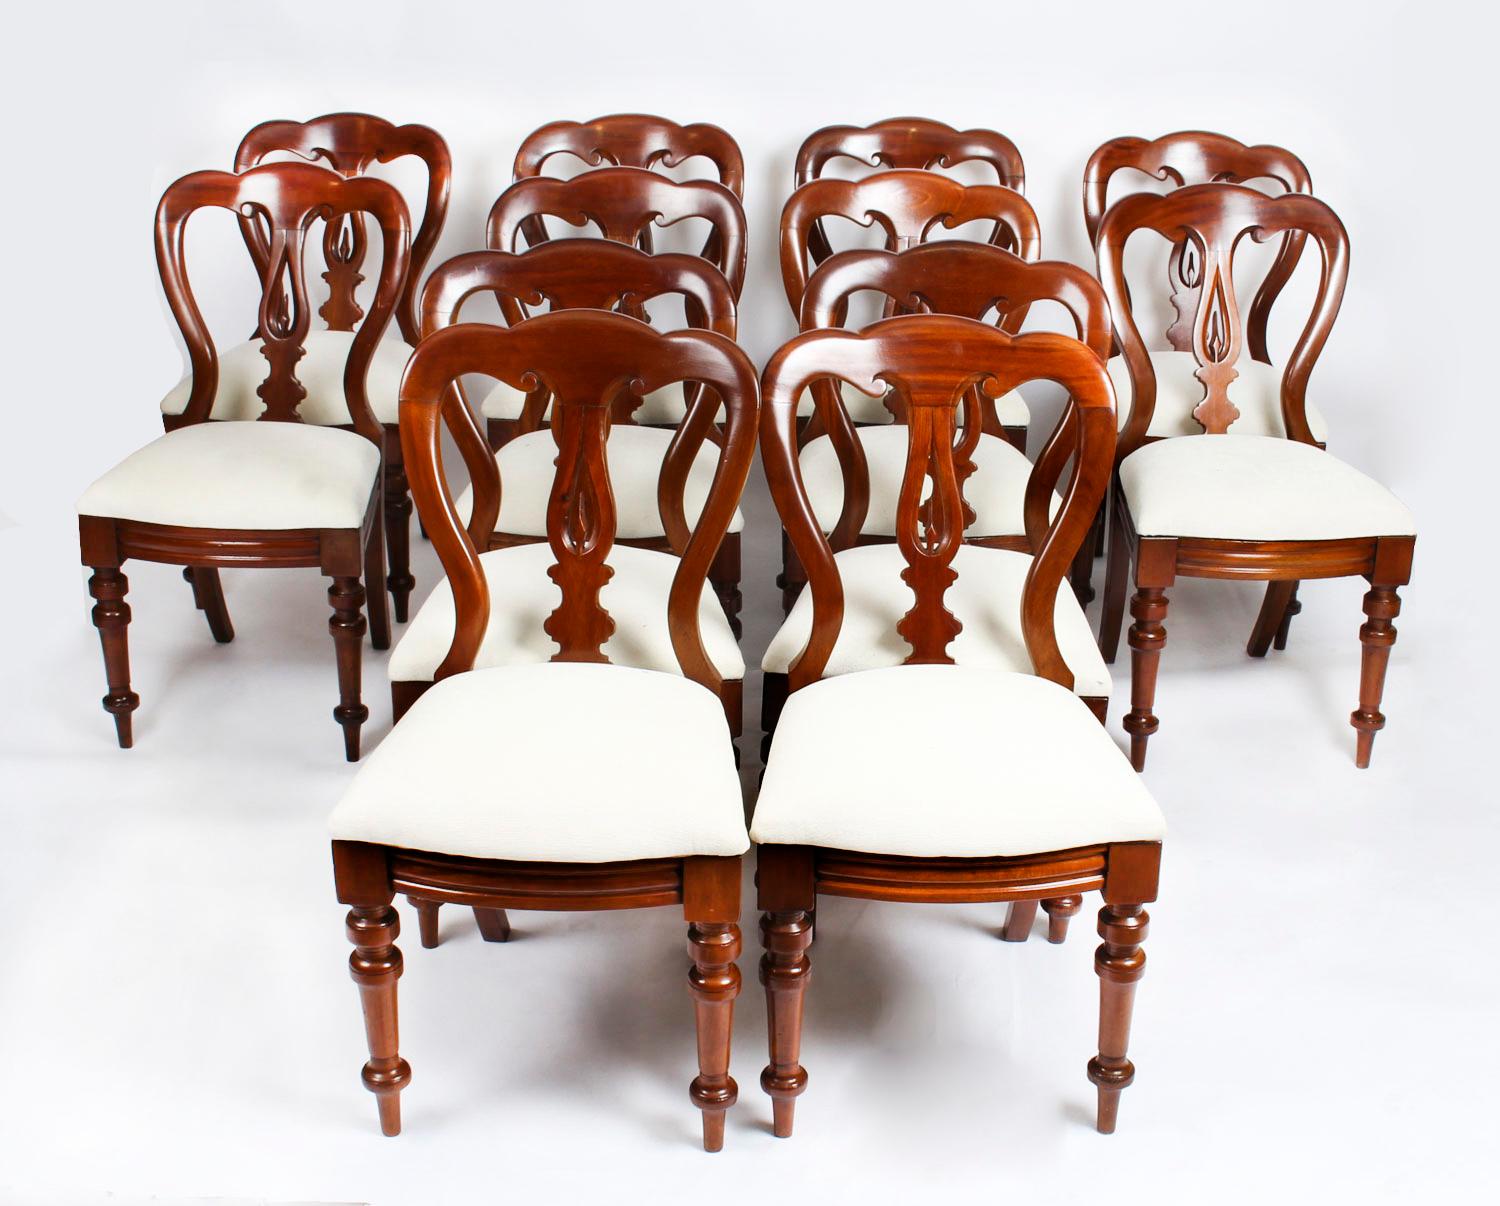 Antique Set of 12 Victorian Mahogany Spoon Back Dining Chairs 19th Century 1